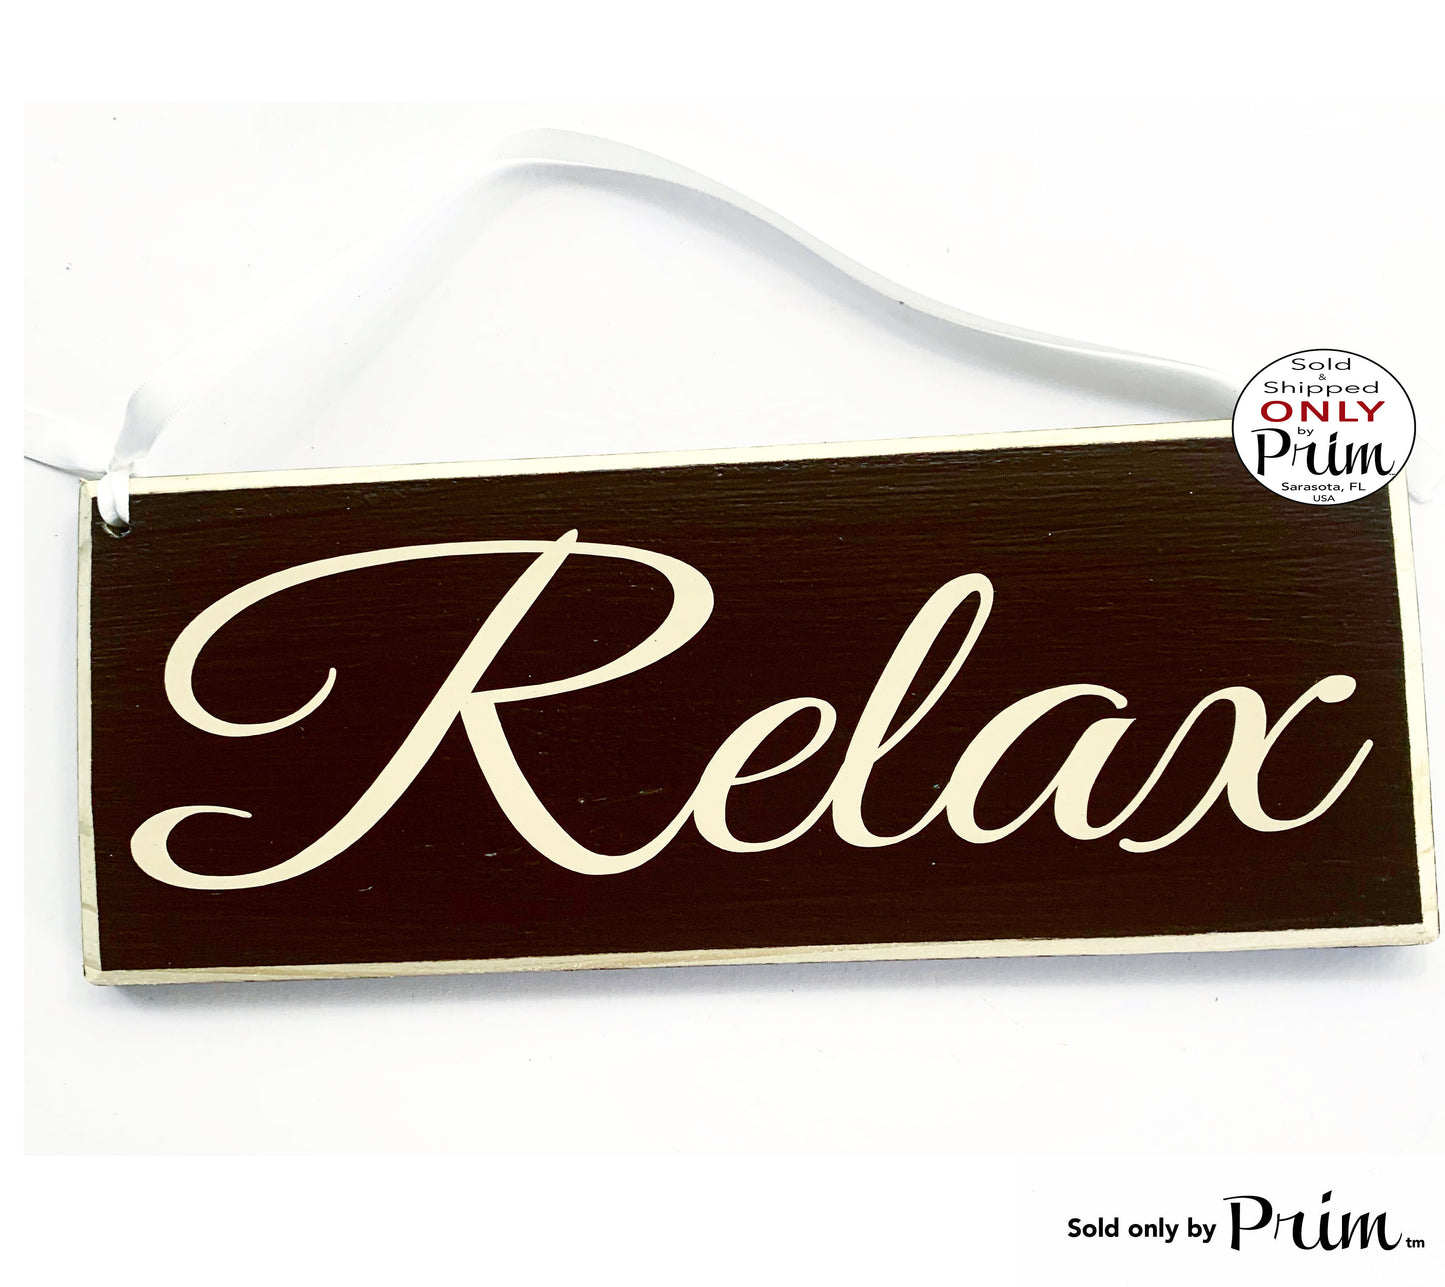 10x4 Relax Refresh Renew Custom Wood Signs 3 Sign Bundle Spa Relaxation Lounge Tranquility Massage Office Salon Quiet Voices Shhh Plaques Designs by Prim